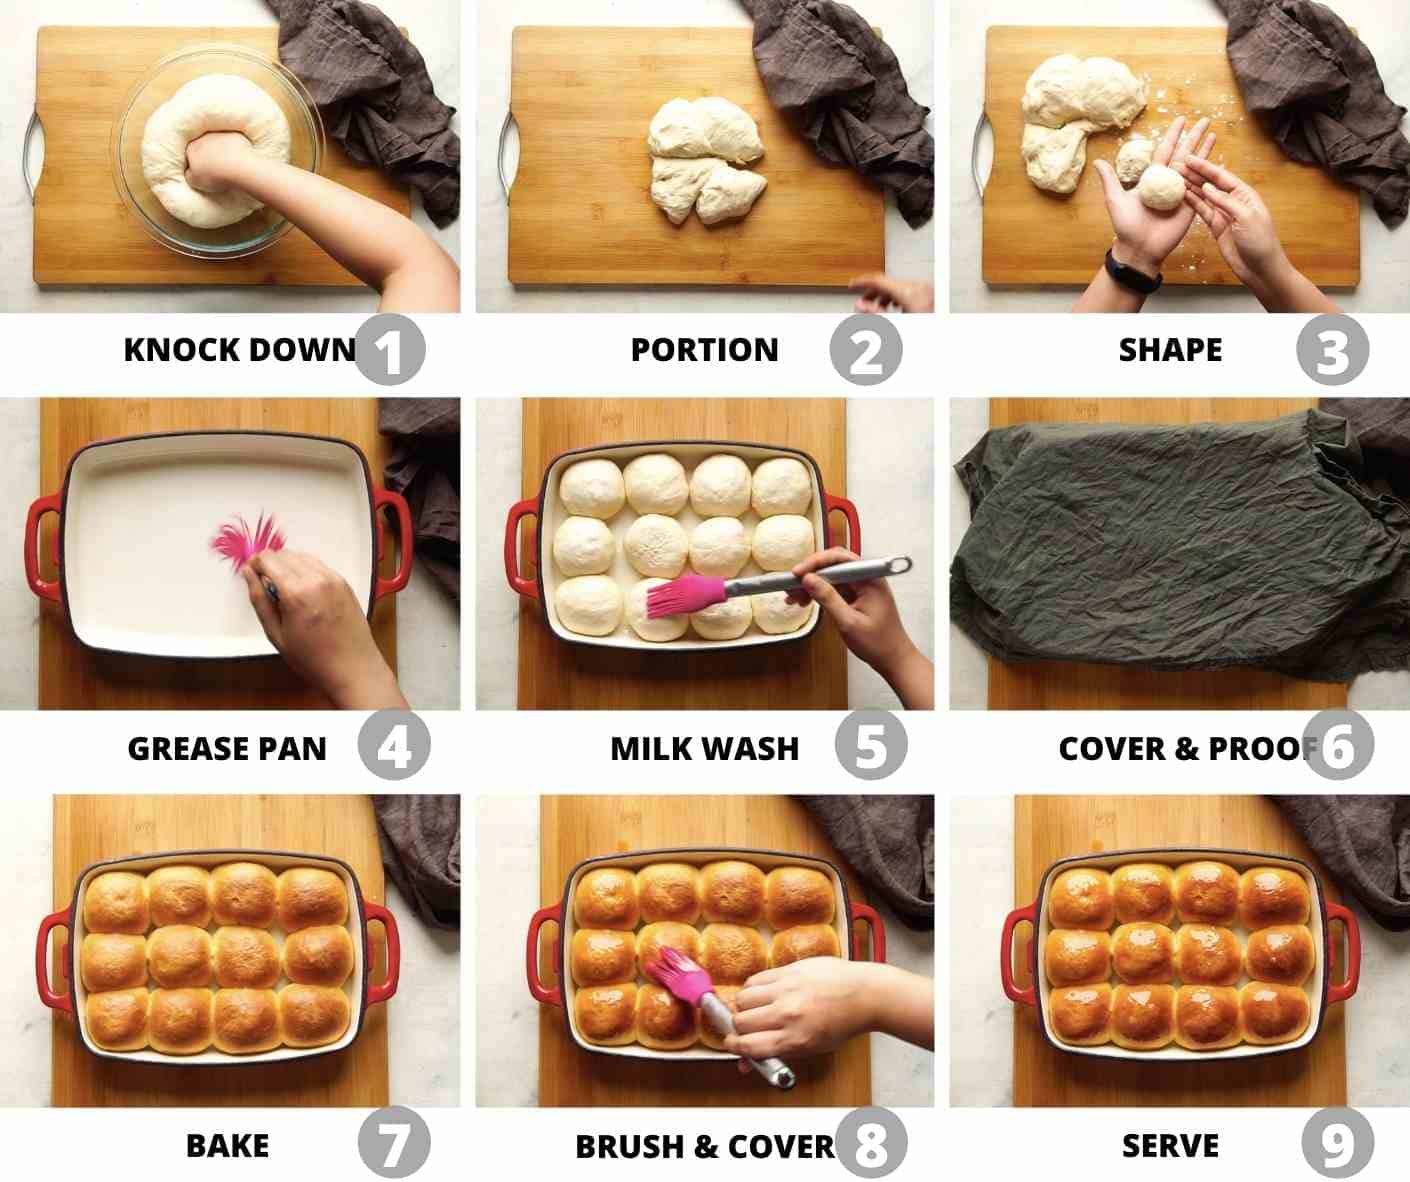 Step by step pictures showing how to proof the dough, shape it and bake it